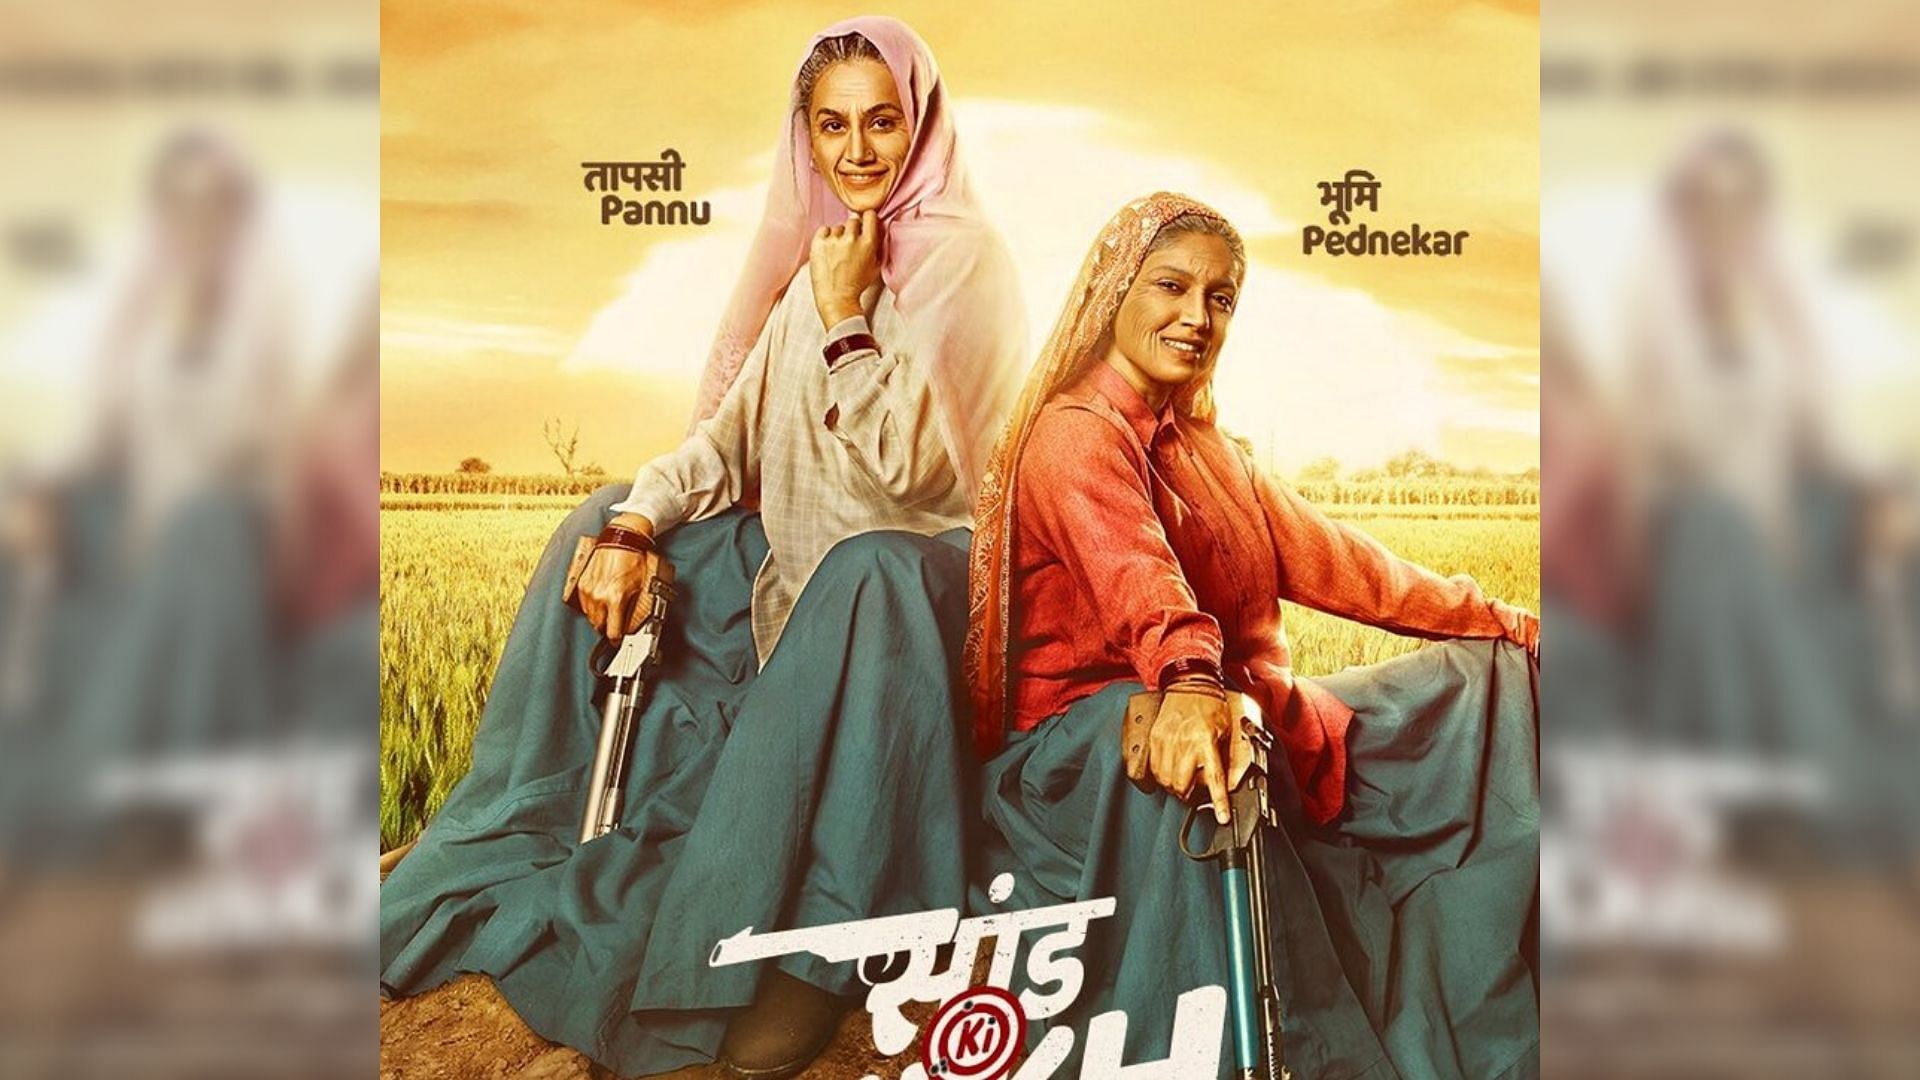 Taapsee Pannu and Bhumi Pednekar in a poster for <i>Saand ki Aankh</i>.